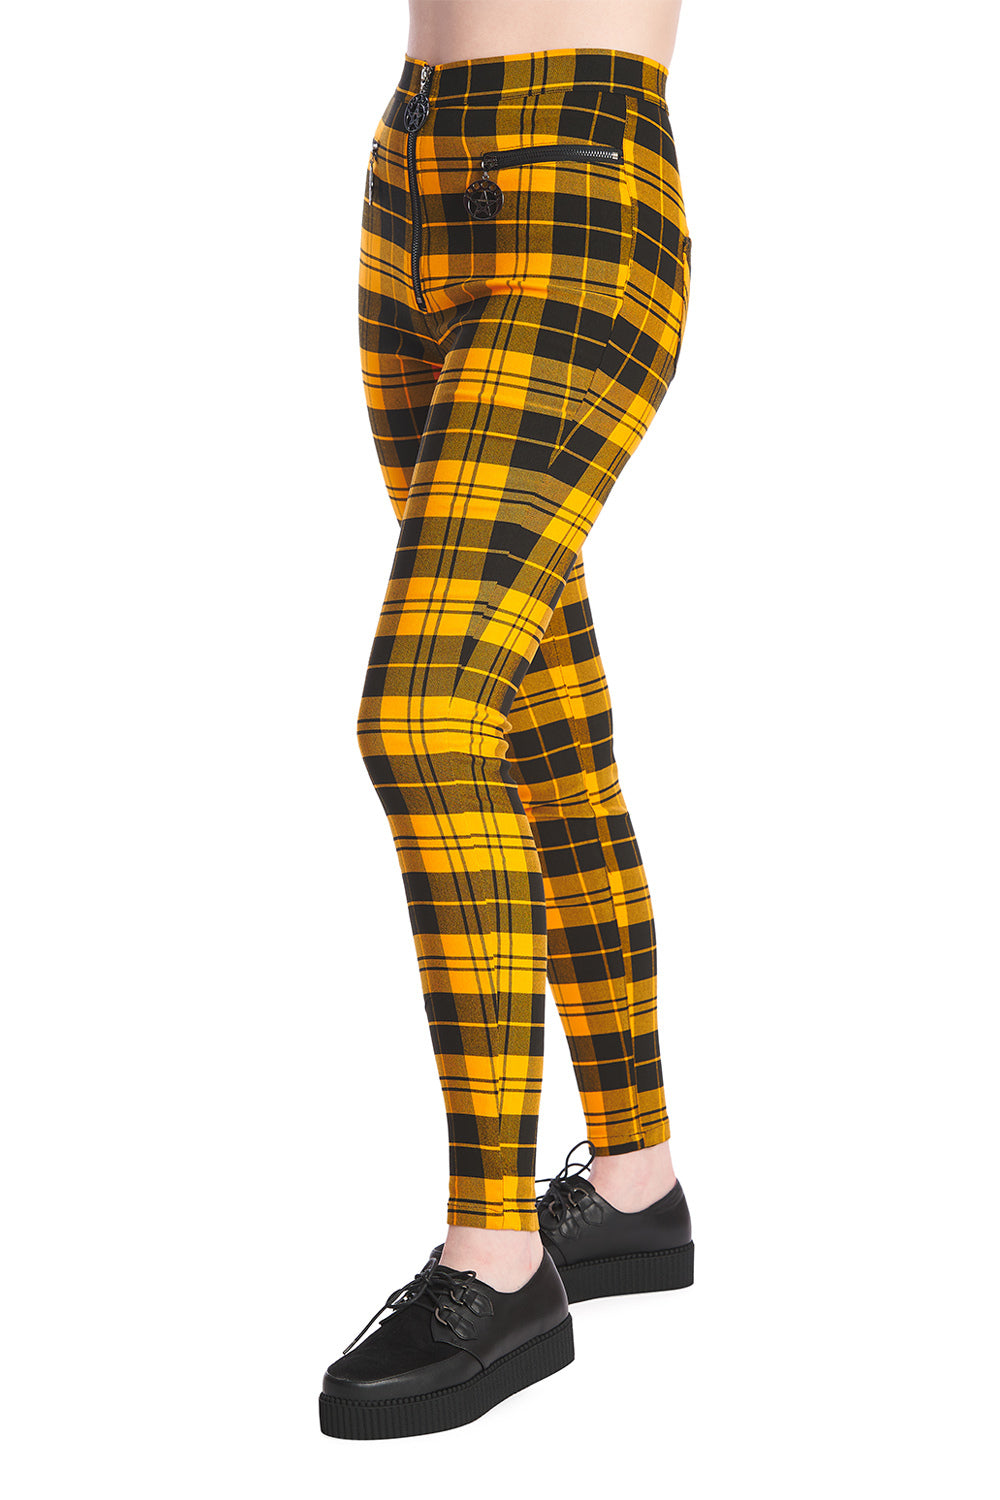 Banned Alternative Check Me Out Tartan Style Trousers